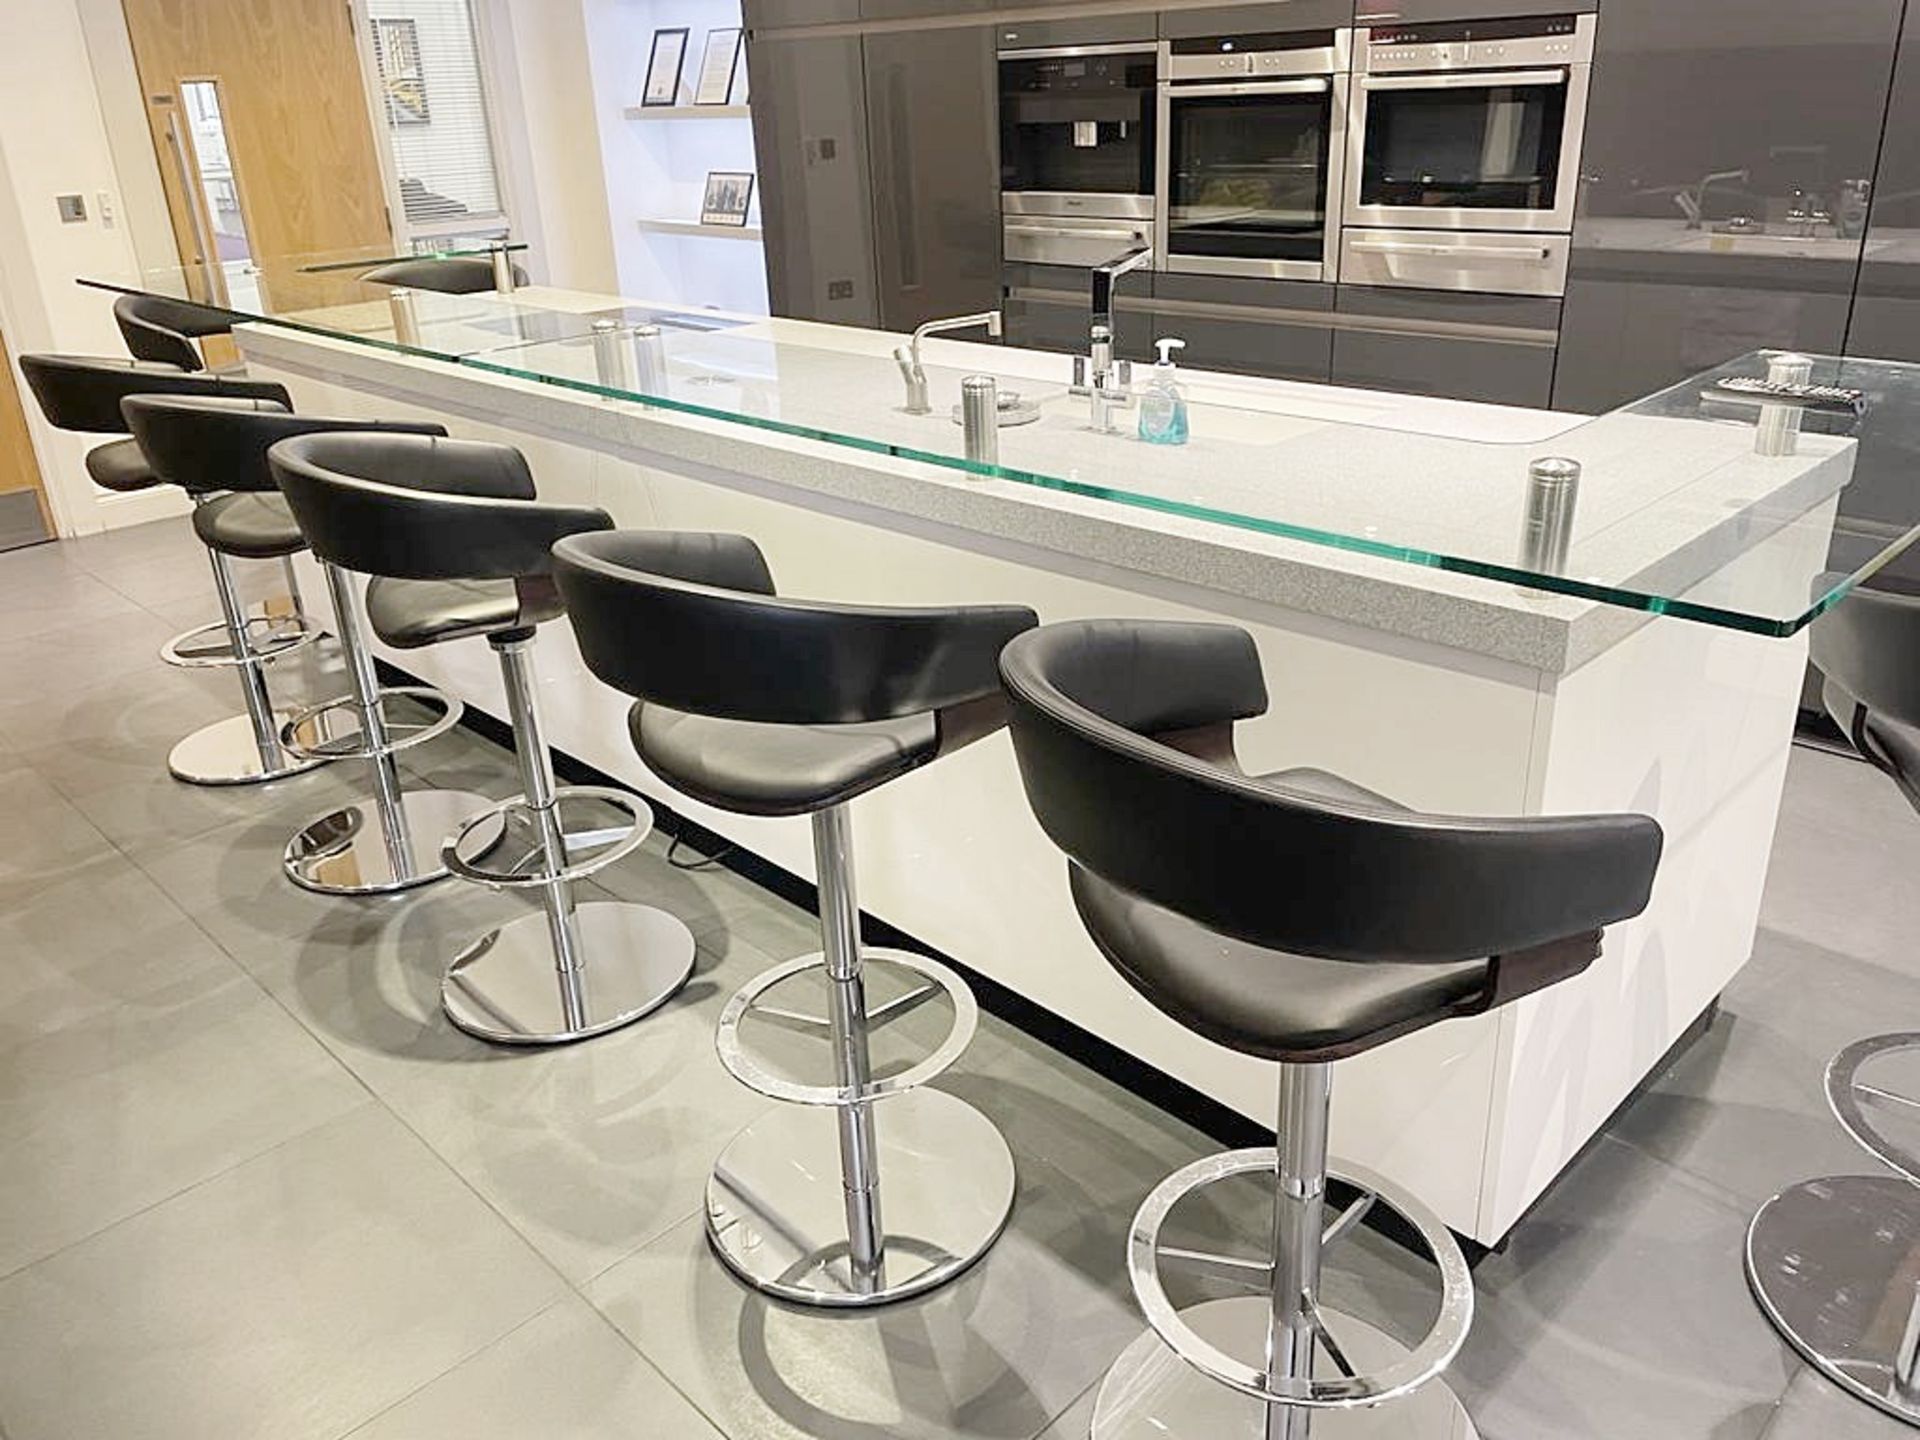 1 x SIEMATIC Bespoke Handleless Gloss Fitted Kitchen with 3.6m Island, Appliances & Granite Worktops - Image 96 of 117